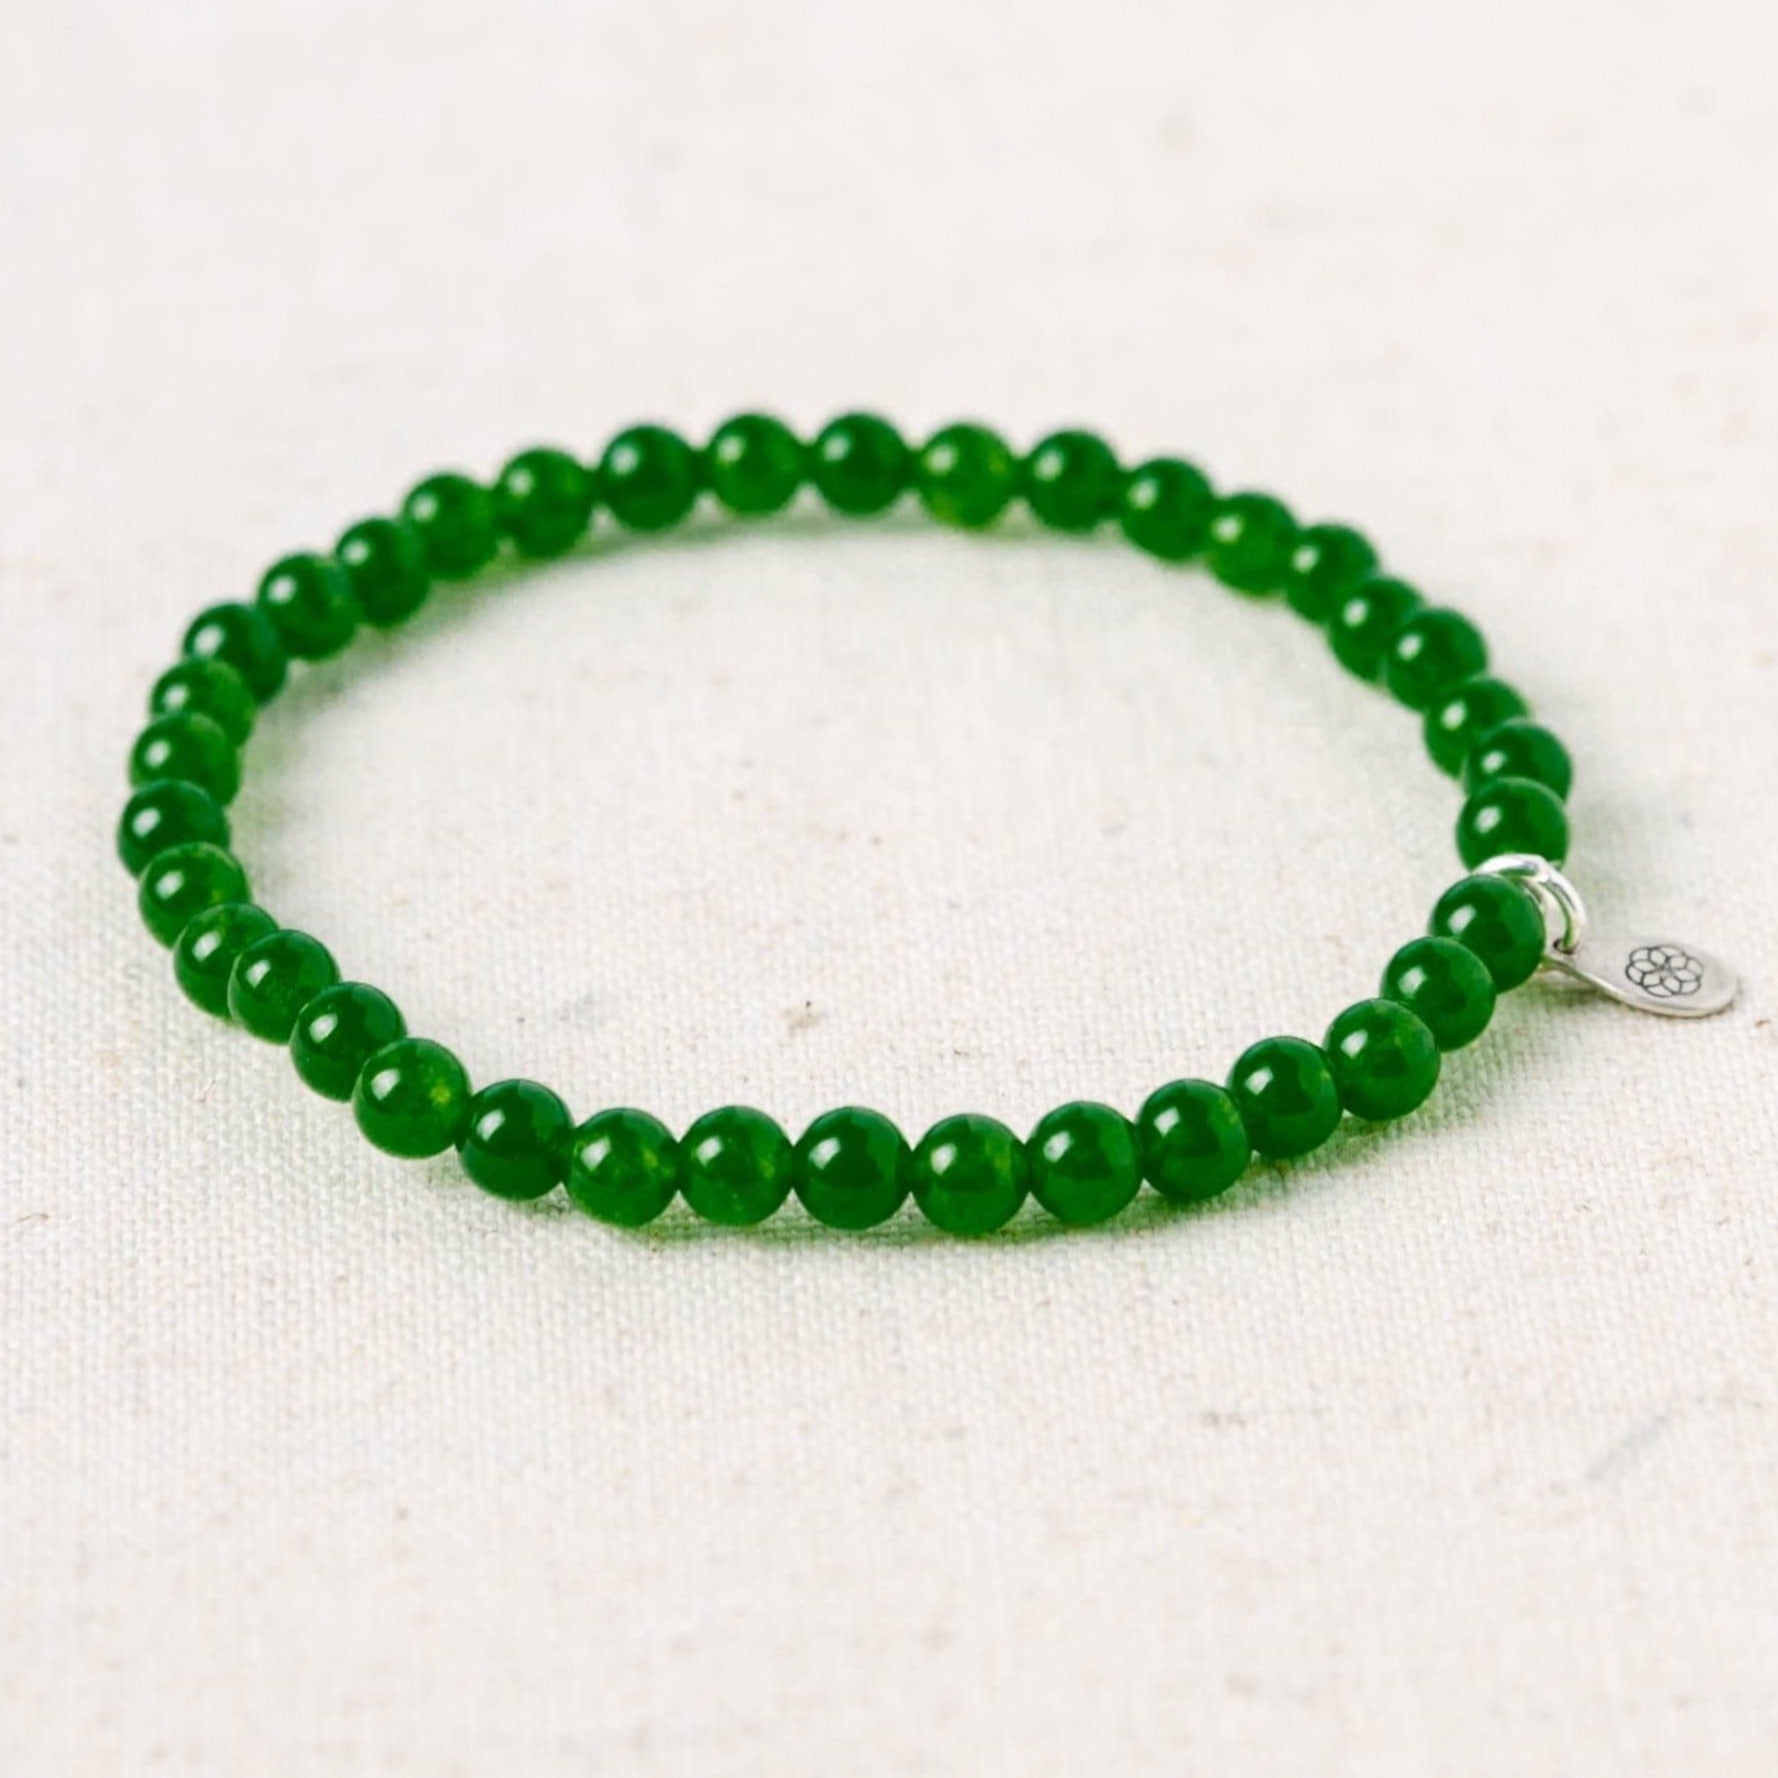 Solid Light Green Seed Bead Bracelet – Jewelry Made by Me